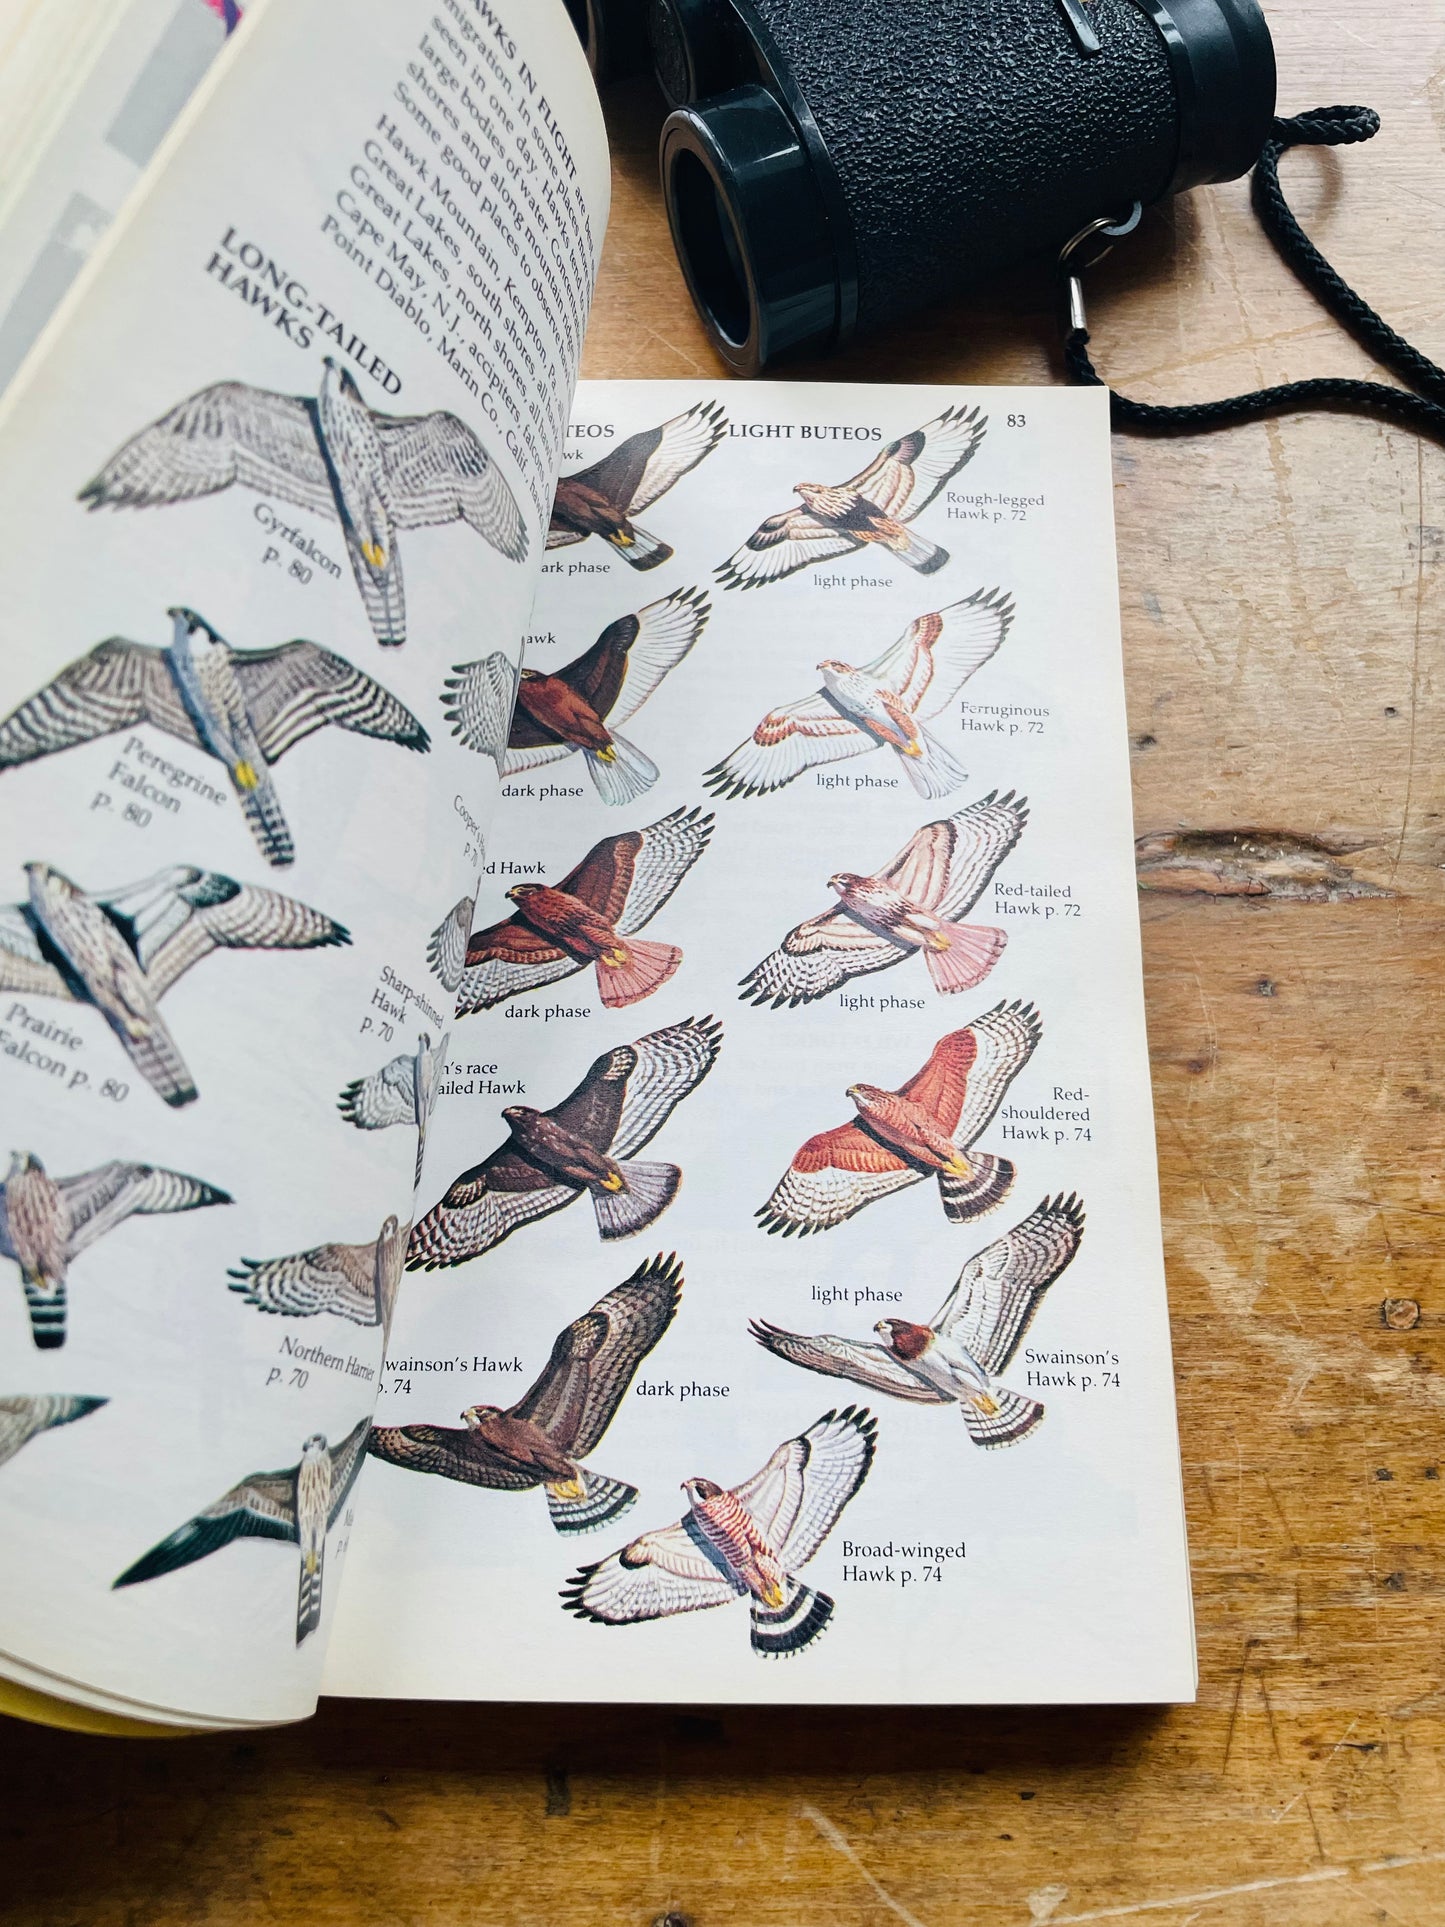 Golden A Guide to Field Identification of Birds of North America Book (1983)